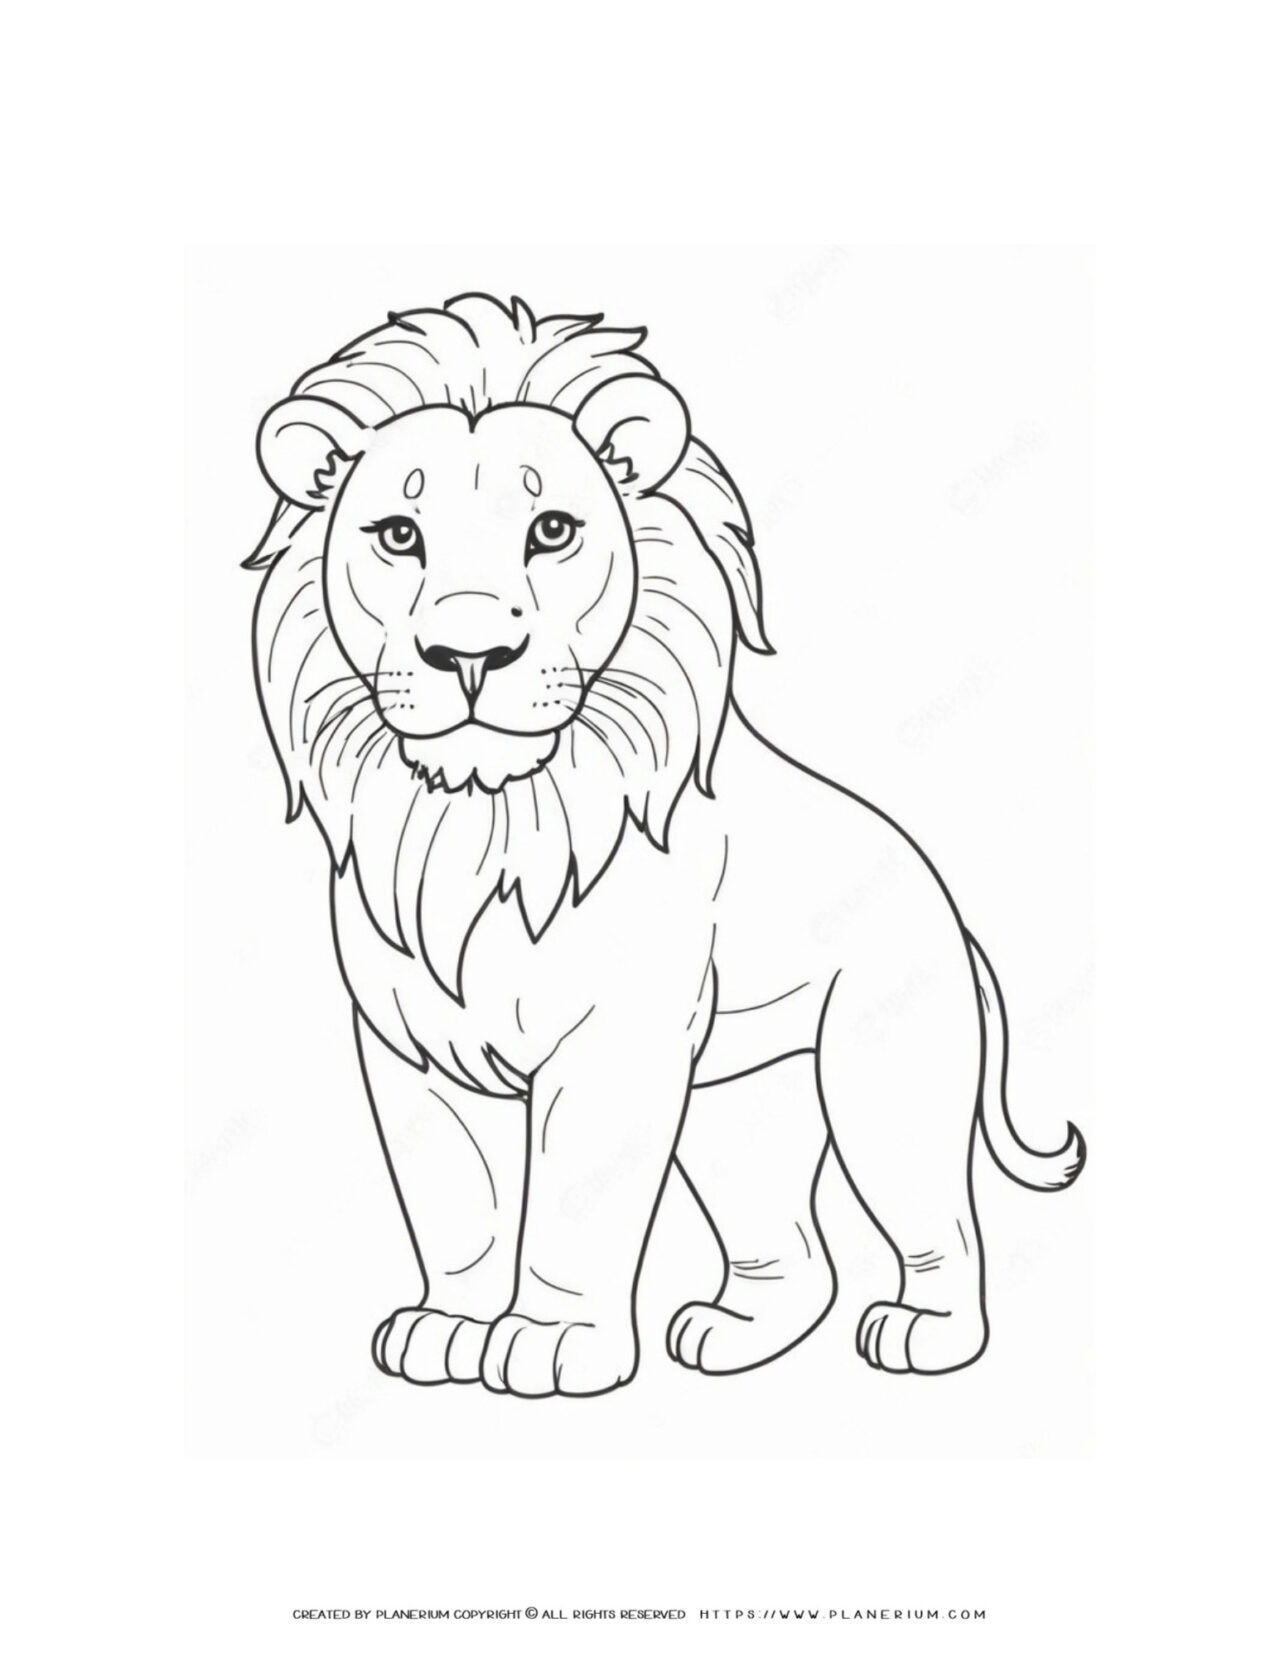 Big-Lion-Outline-Coloring-Page-for-Kids